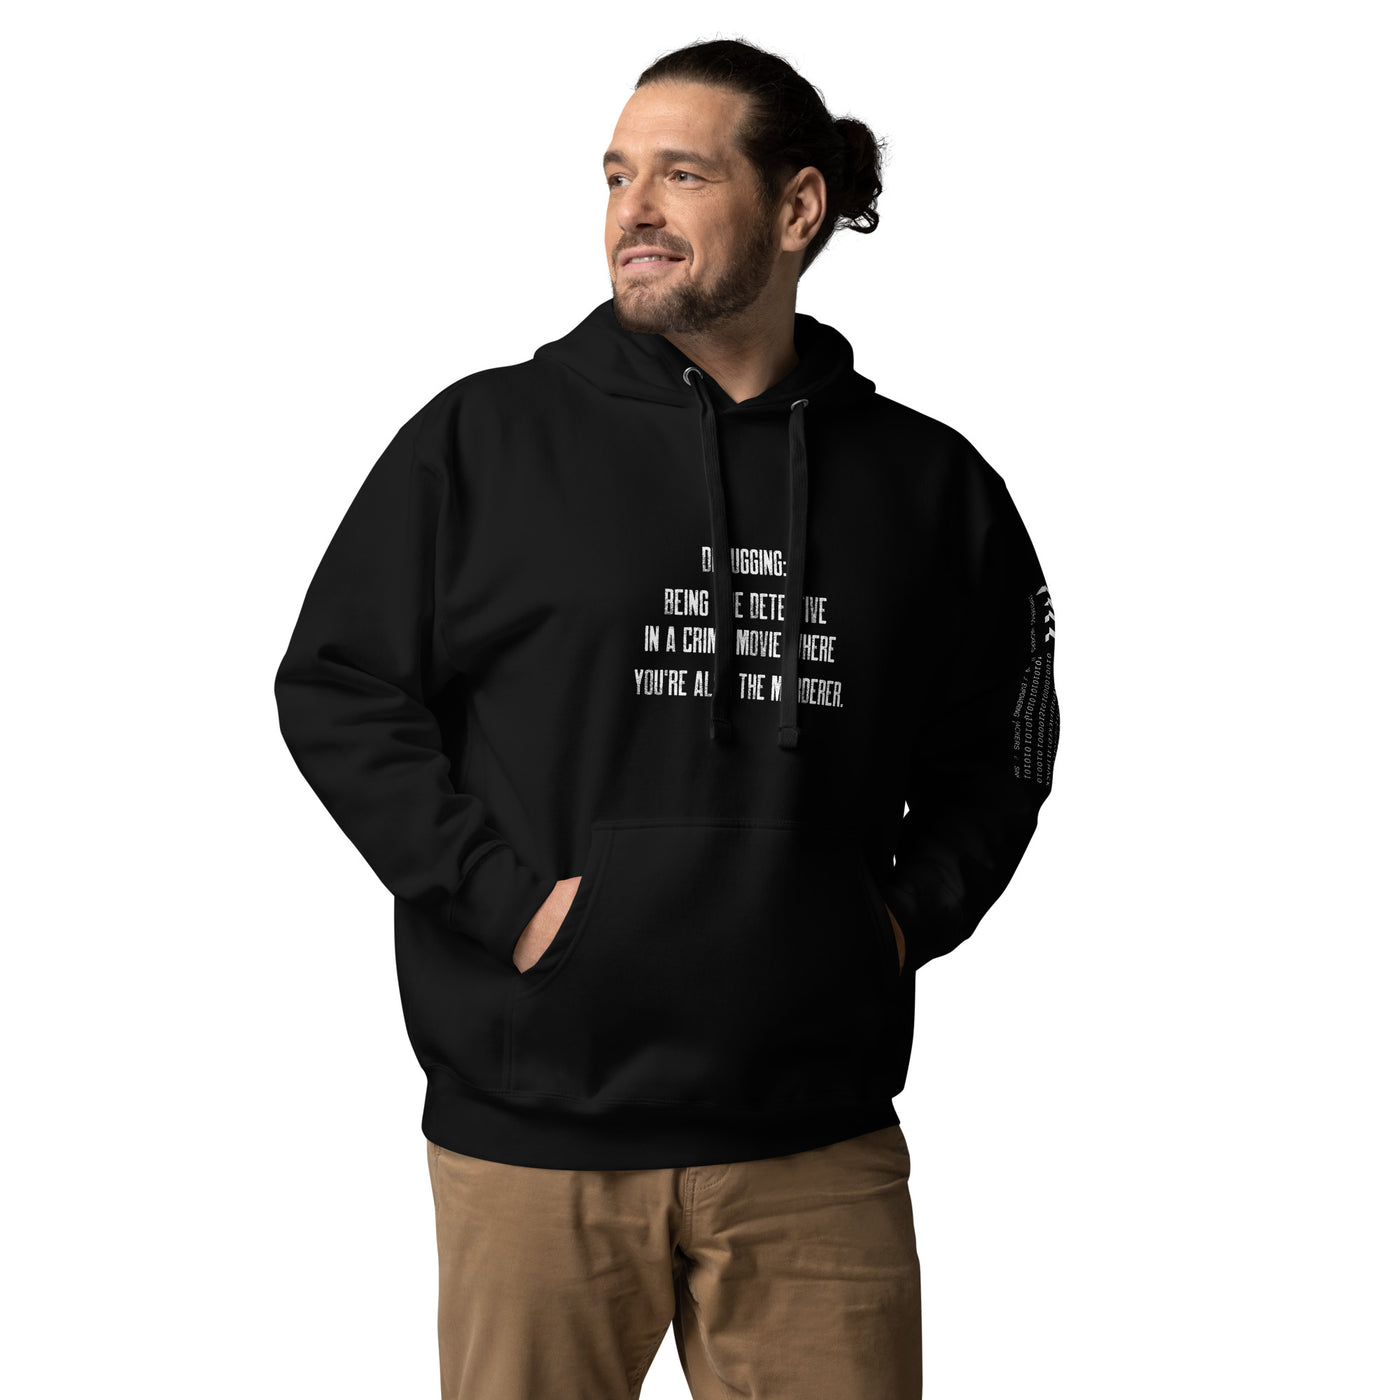 Debugging Being the detective in a crime movie where you are also the murderer V2 - Unisex Hoodie